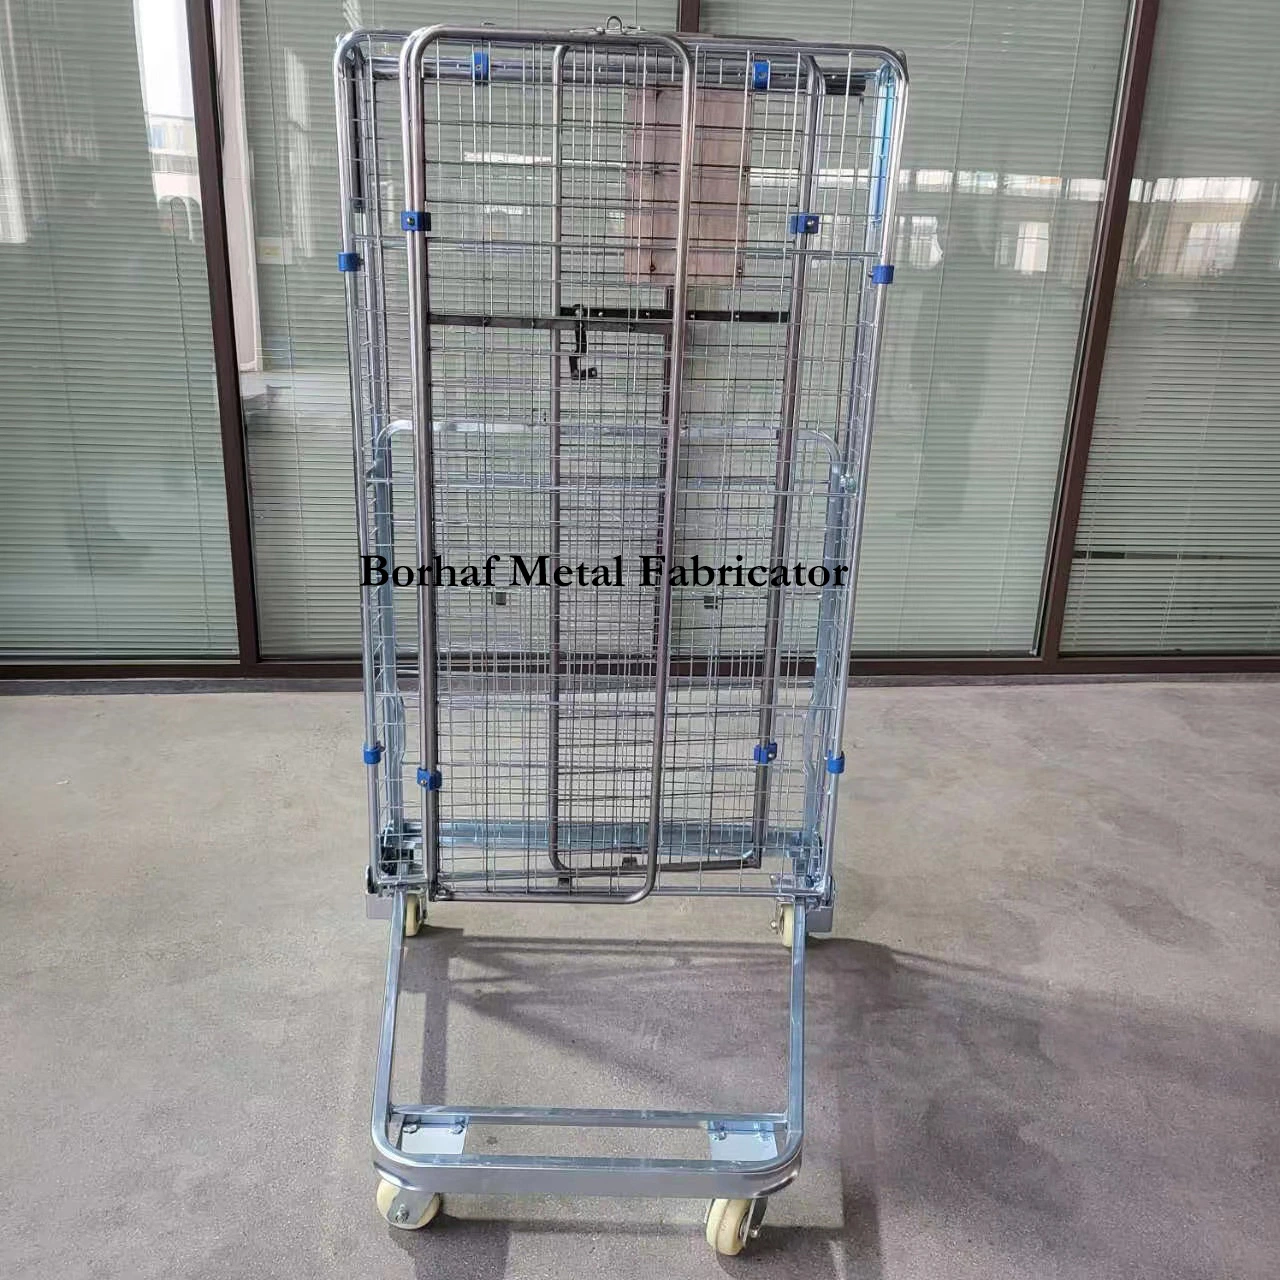 4 Sided Logistic A-Frame Security Nestable Storage Folding Metal Steel Cargo Mesh Roll Cage Containers Foldable Trolley